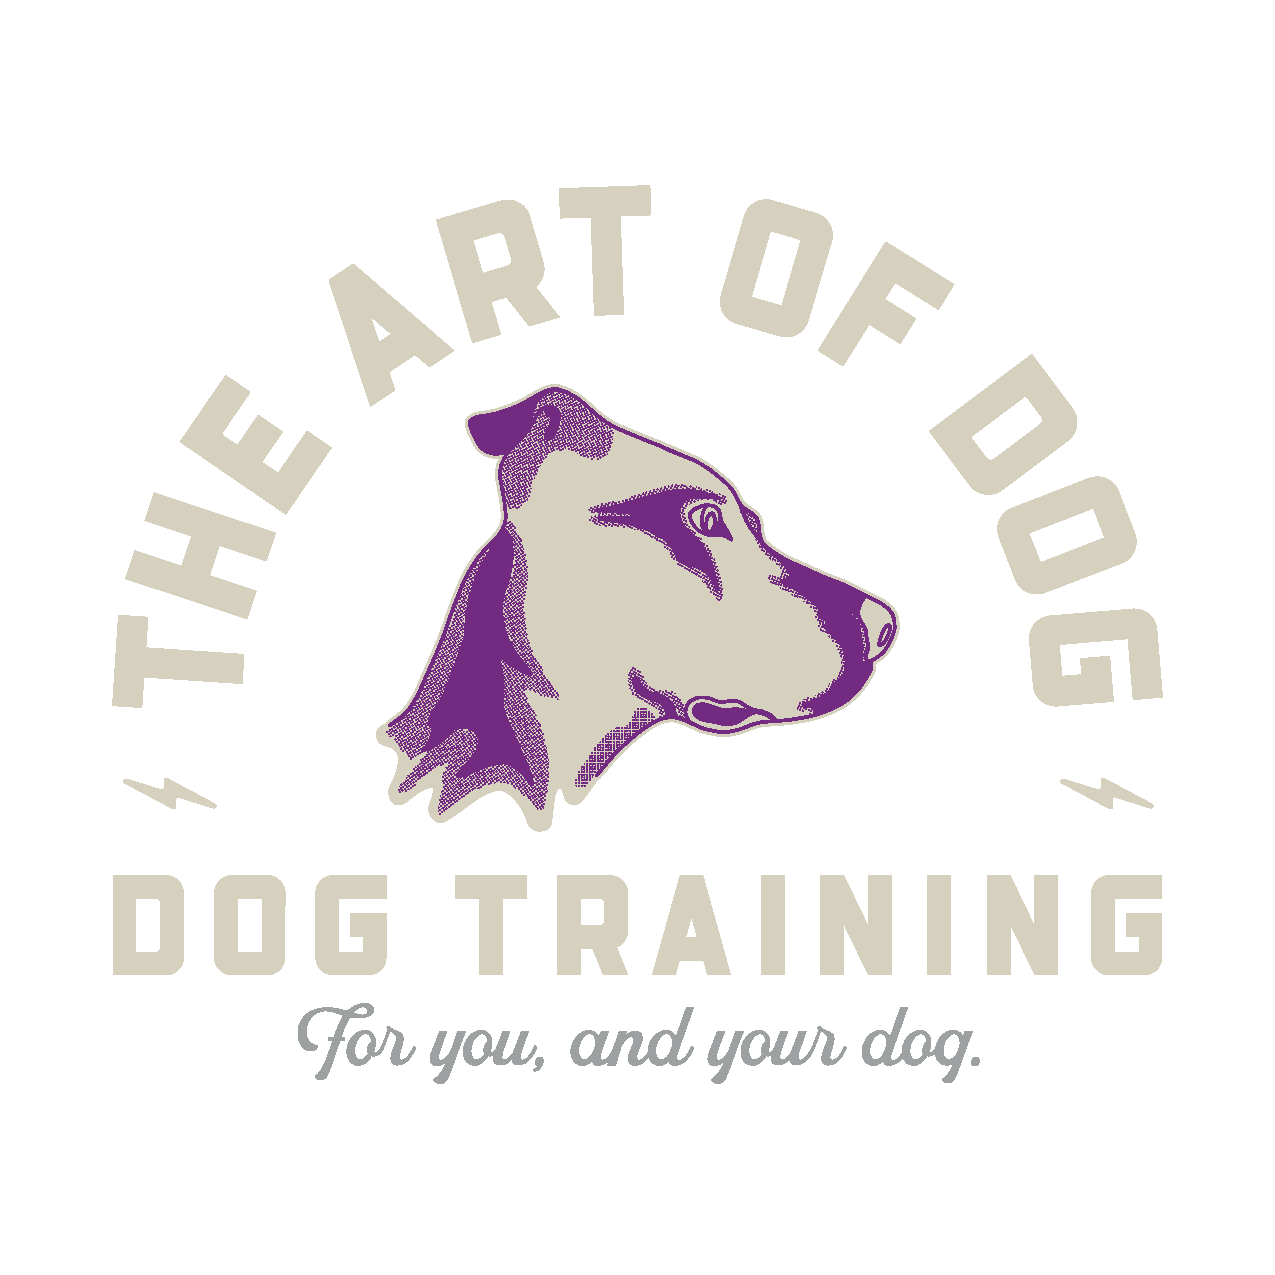 The Art of Dog